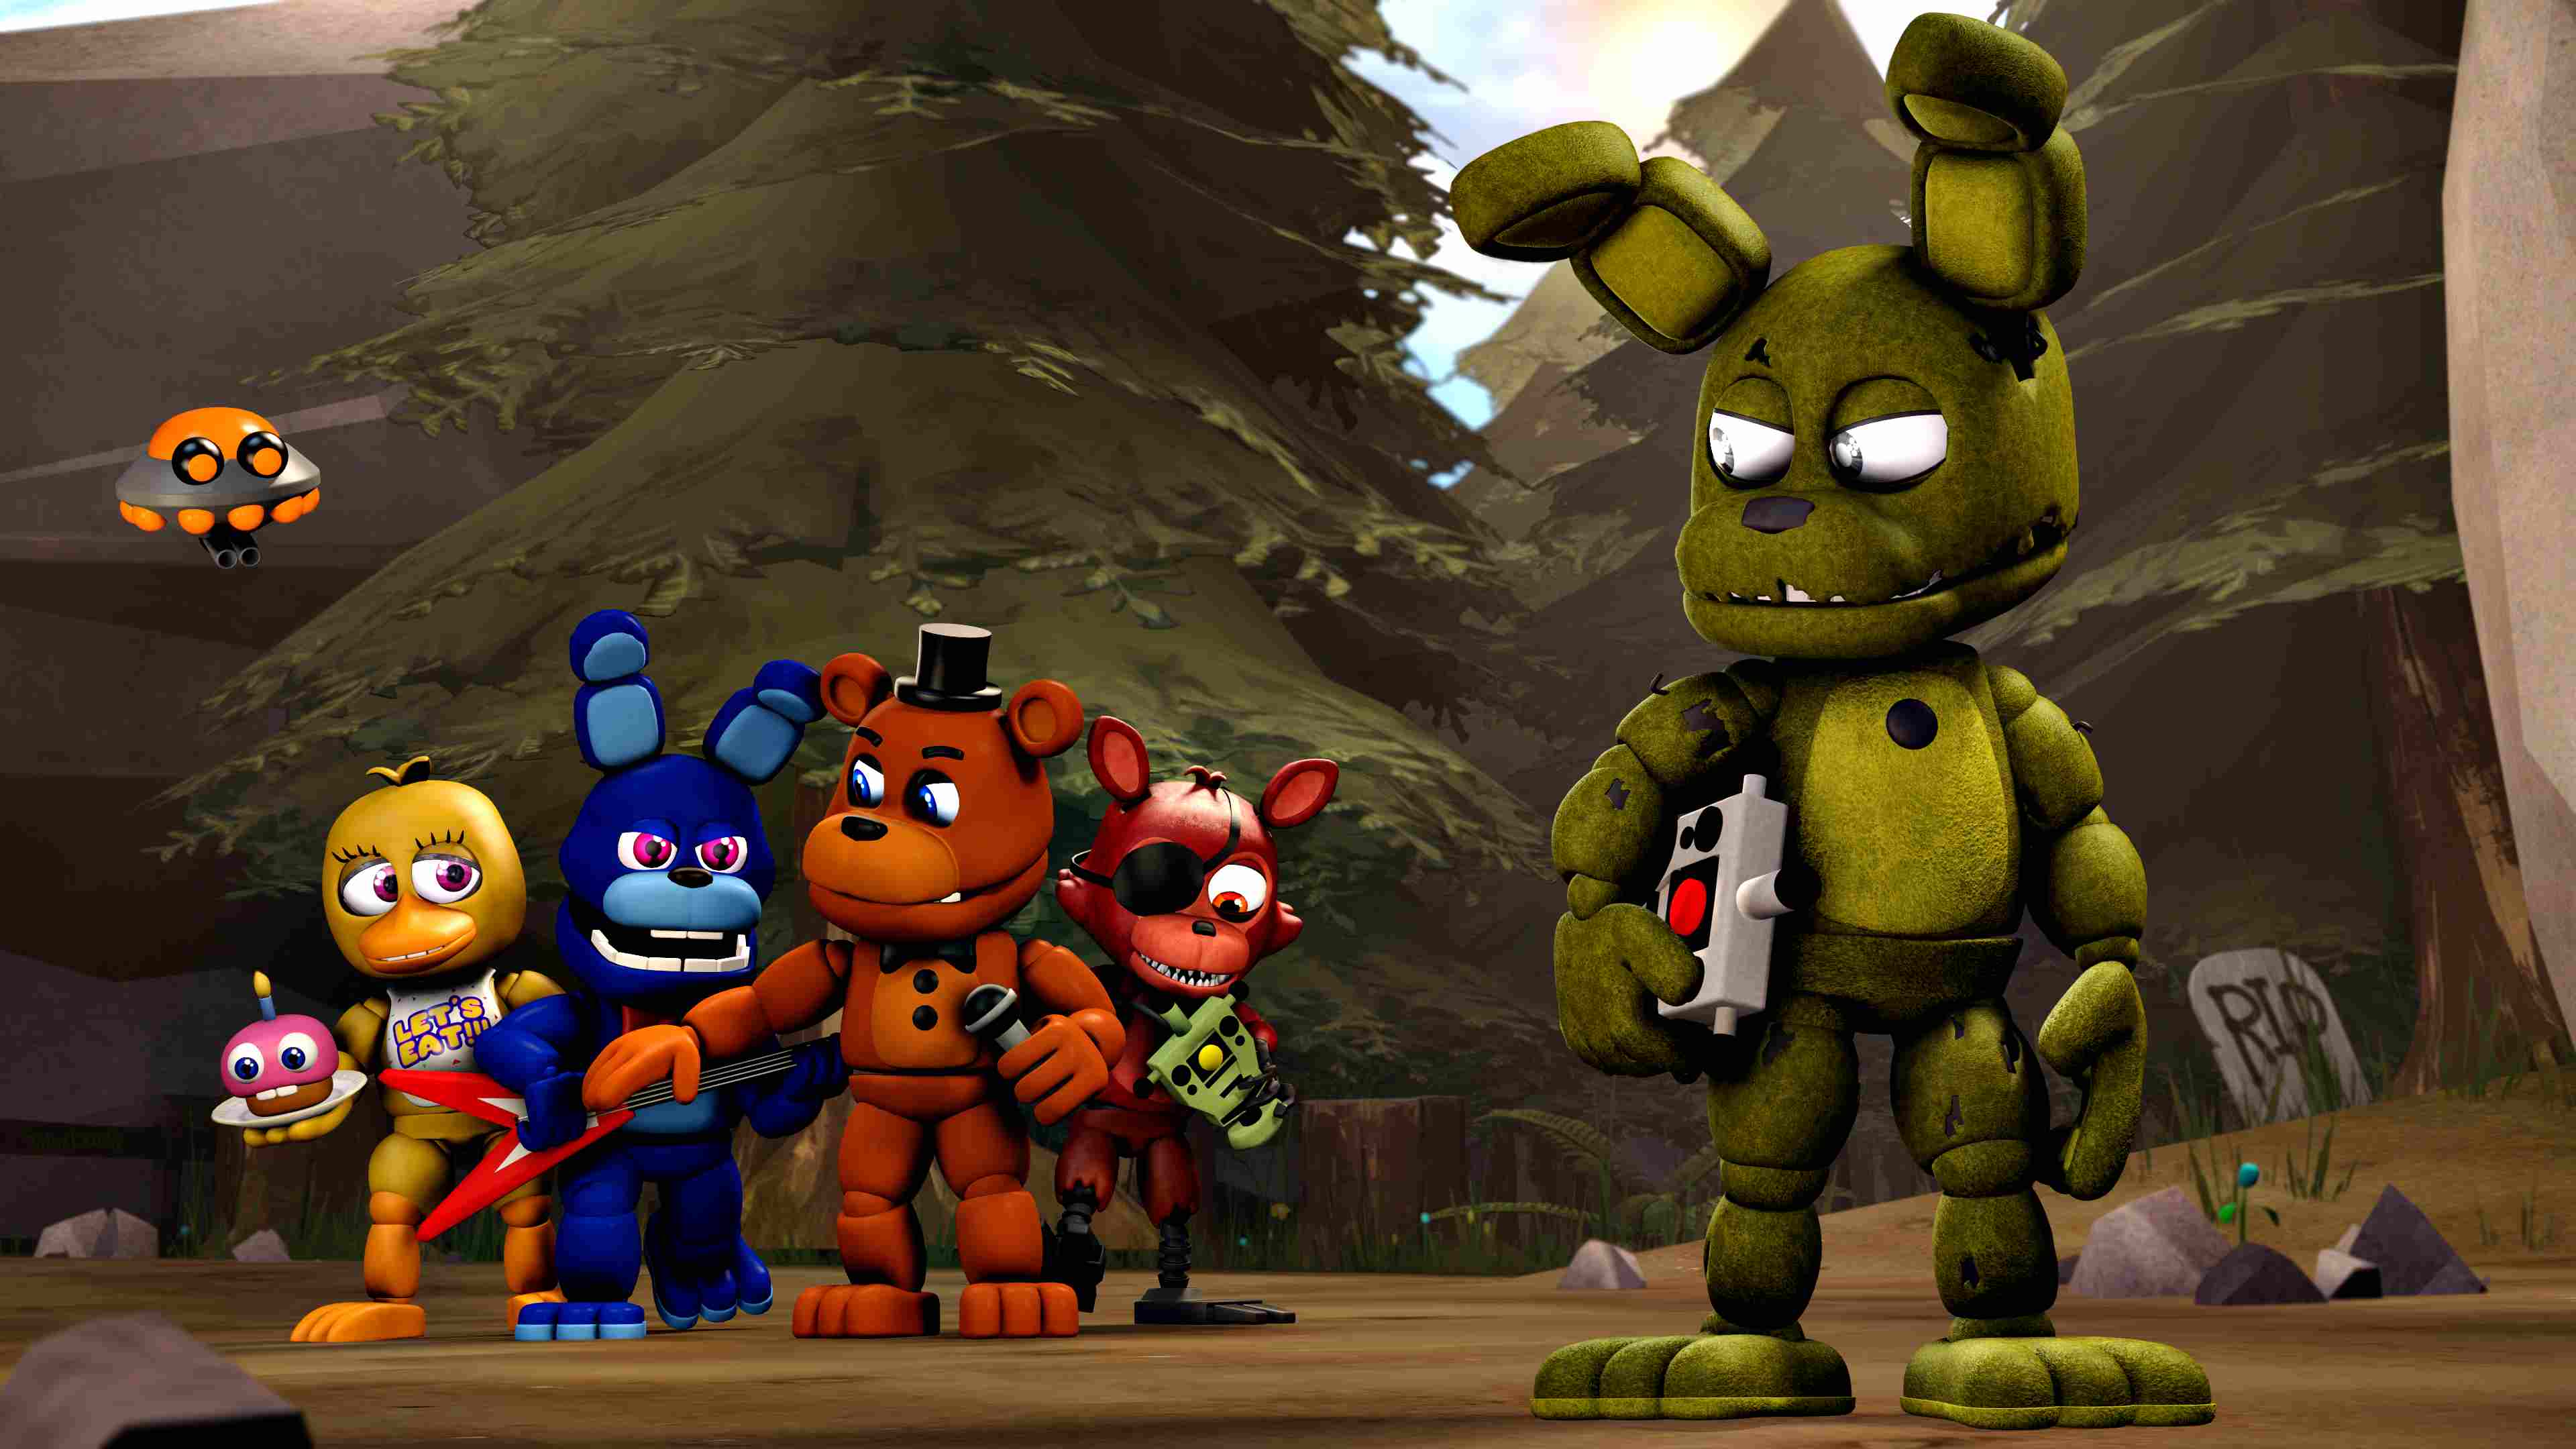 FNAF Network on X: Fact 37: It's still possible to download FNaF World  from Steam for free (including Update 2) on Windows PCs 1) Have Steam  running and press the 'Windows' button